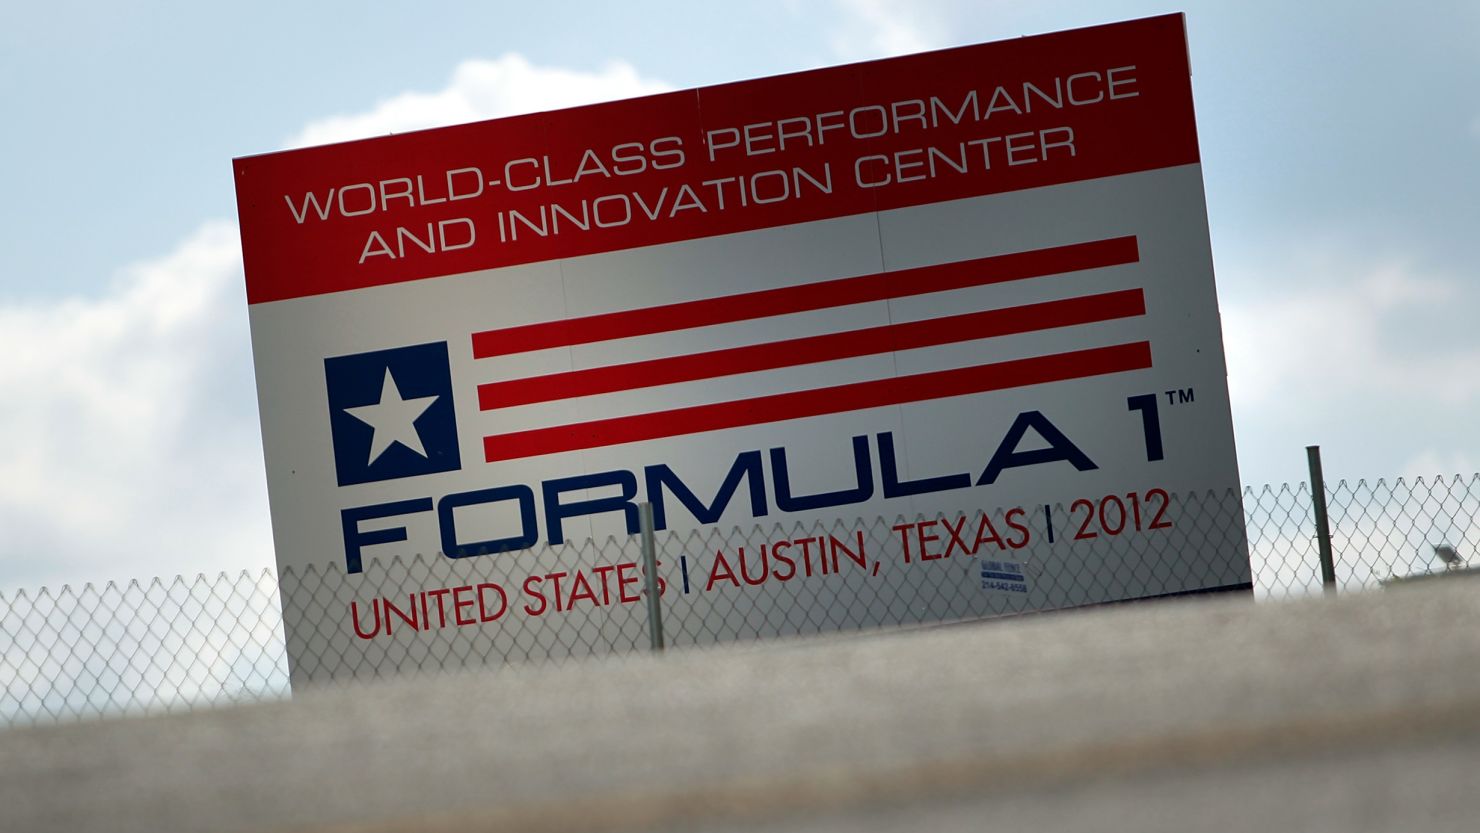 The purpose-built circuit in Texas was due to host a round of the Formula One world championship from 2012 onwards.